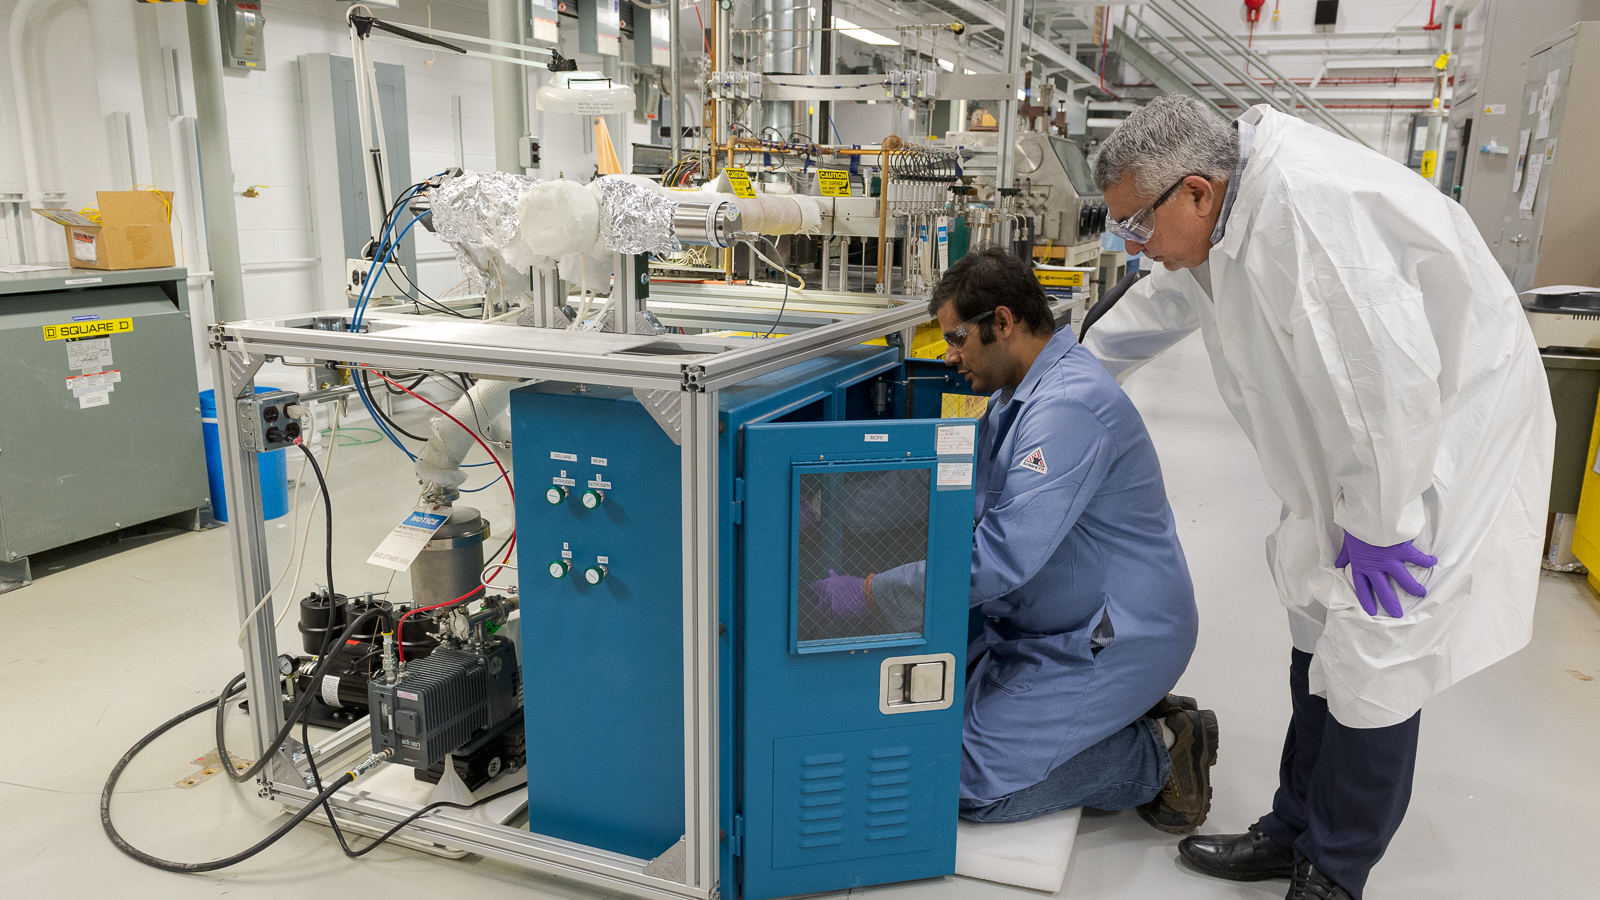 Here, Bhattacharya and Yacout adjust lab equipment to deposit ALD-based nuclear coatings. (Image by Argonne National Laboratory.)